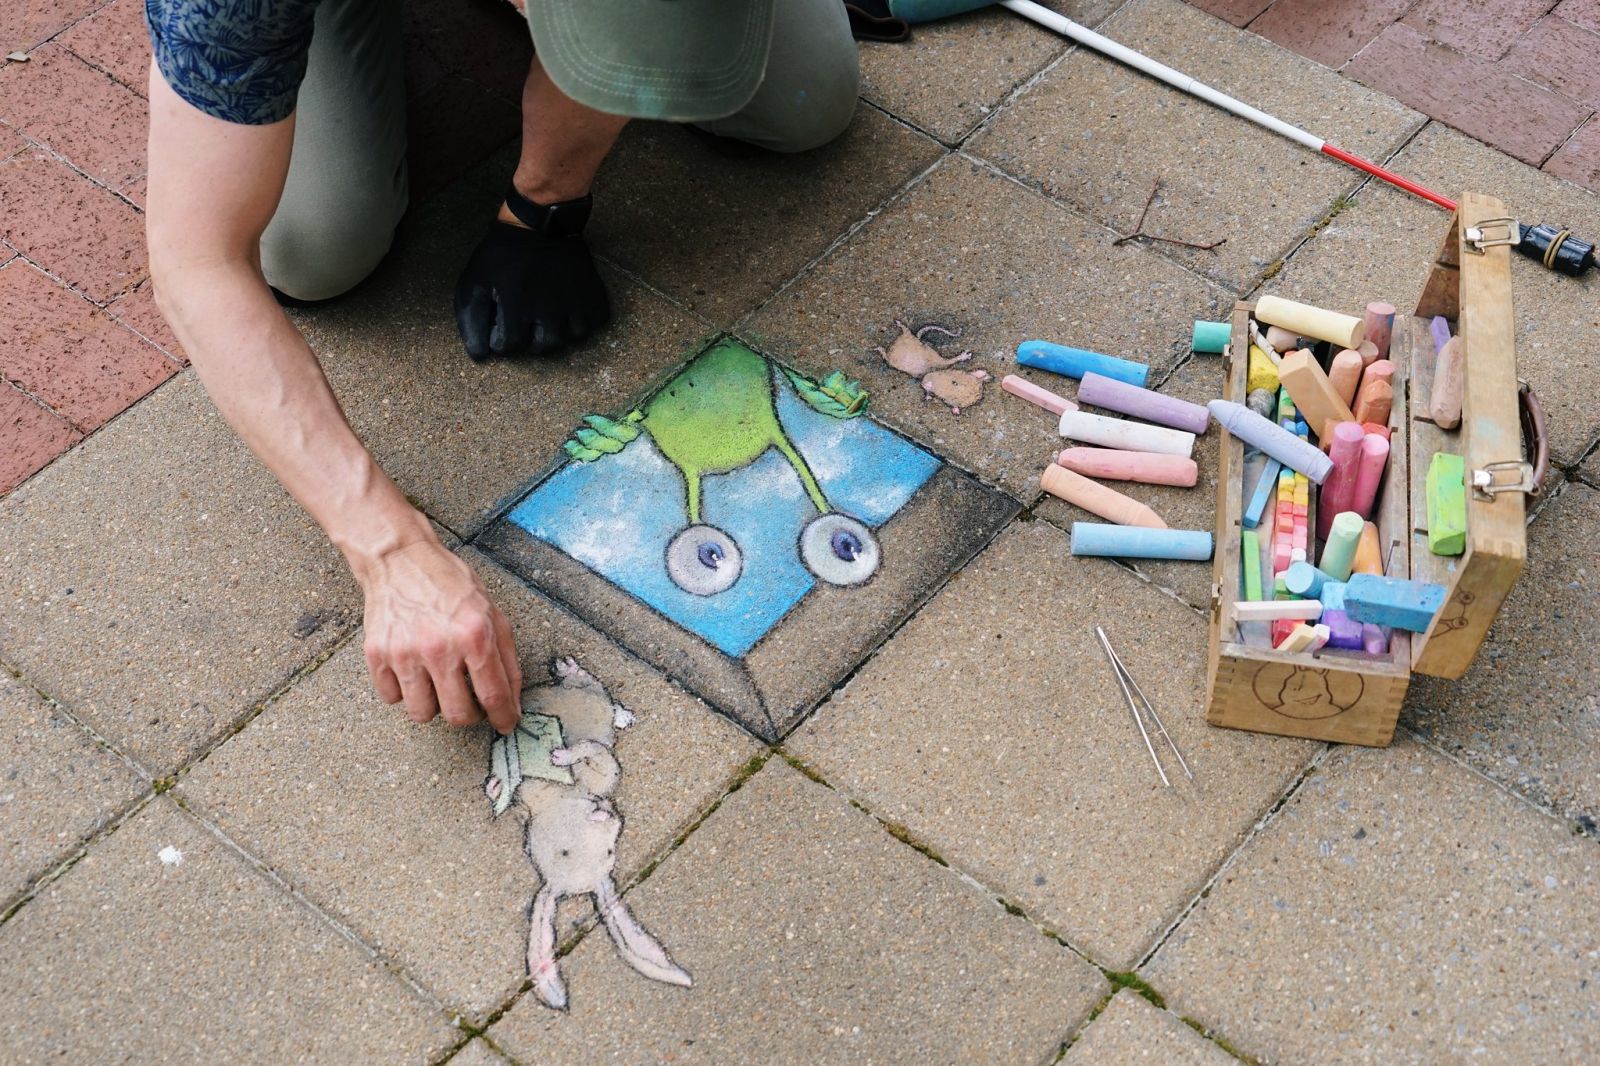 Chalk artist David Zinn will return to Main Street for the festival with his sidewalk creations and a new book. (Photo/Provided)